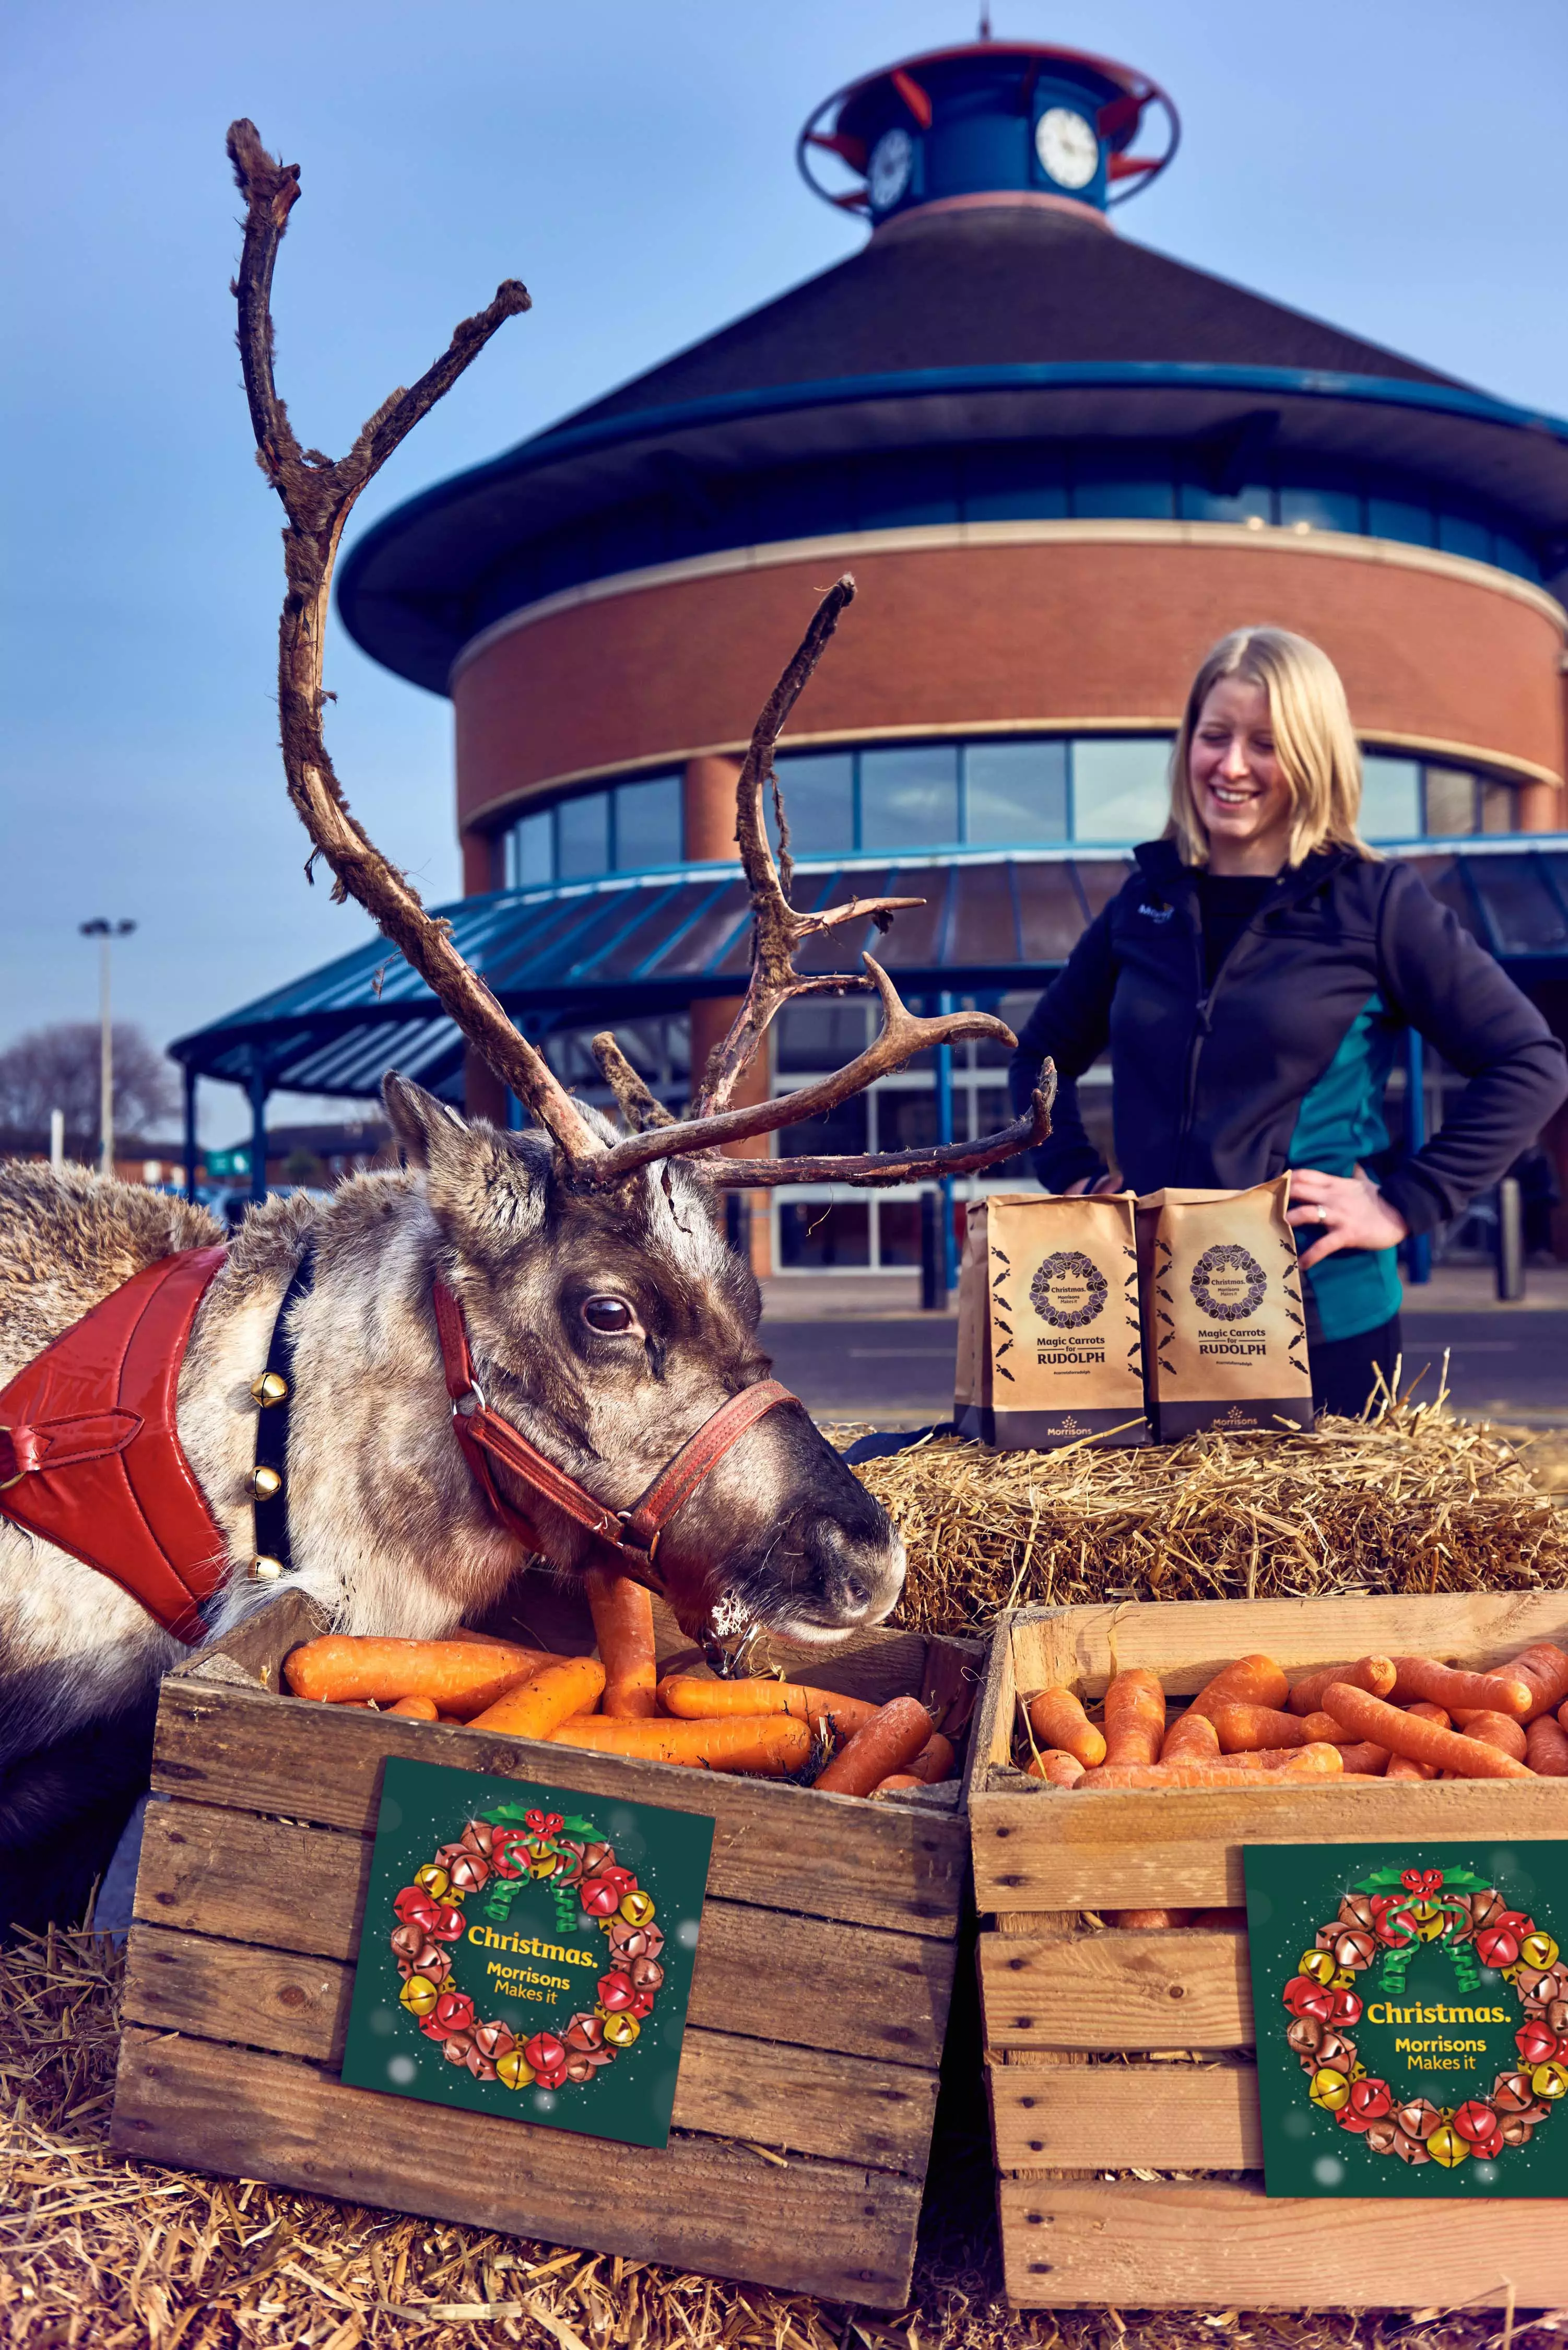 This reindeer certainly seems to have no qualms about the carrots being wonky (